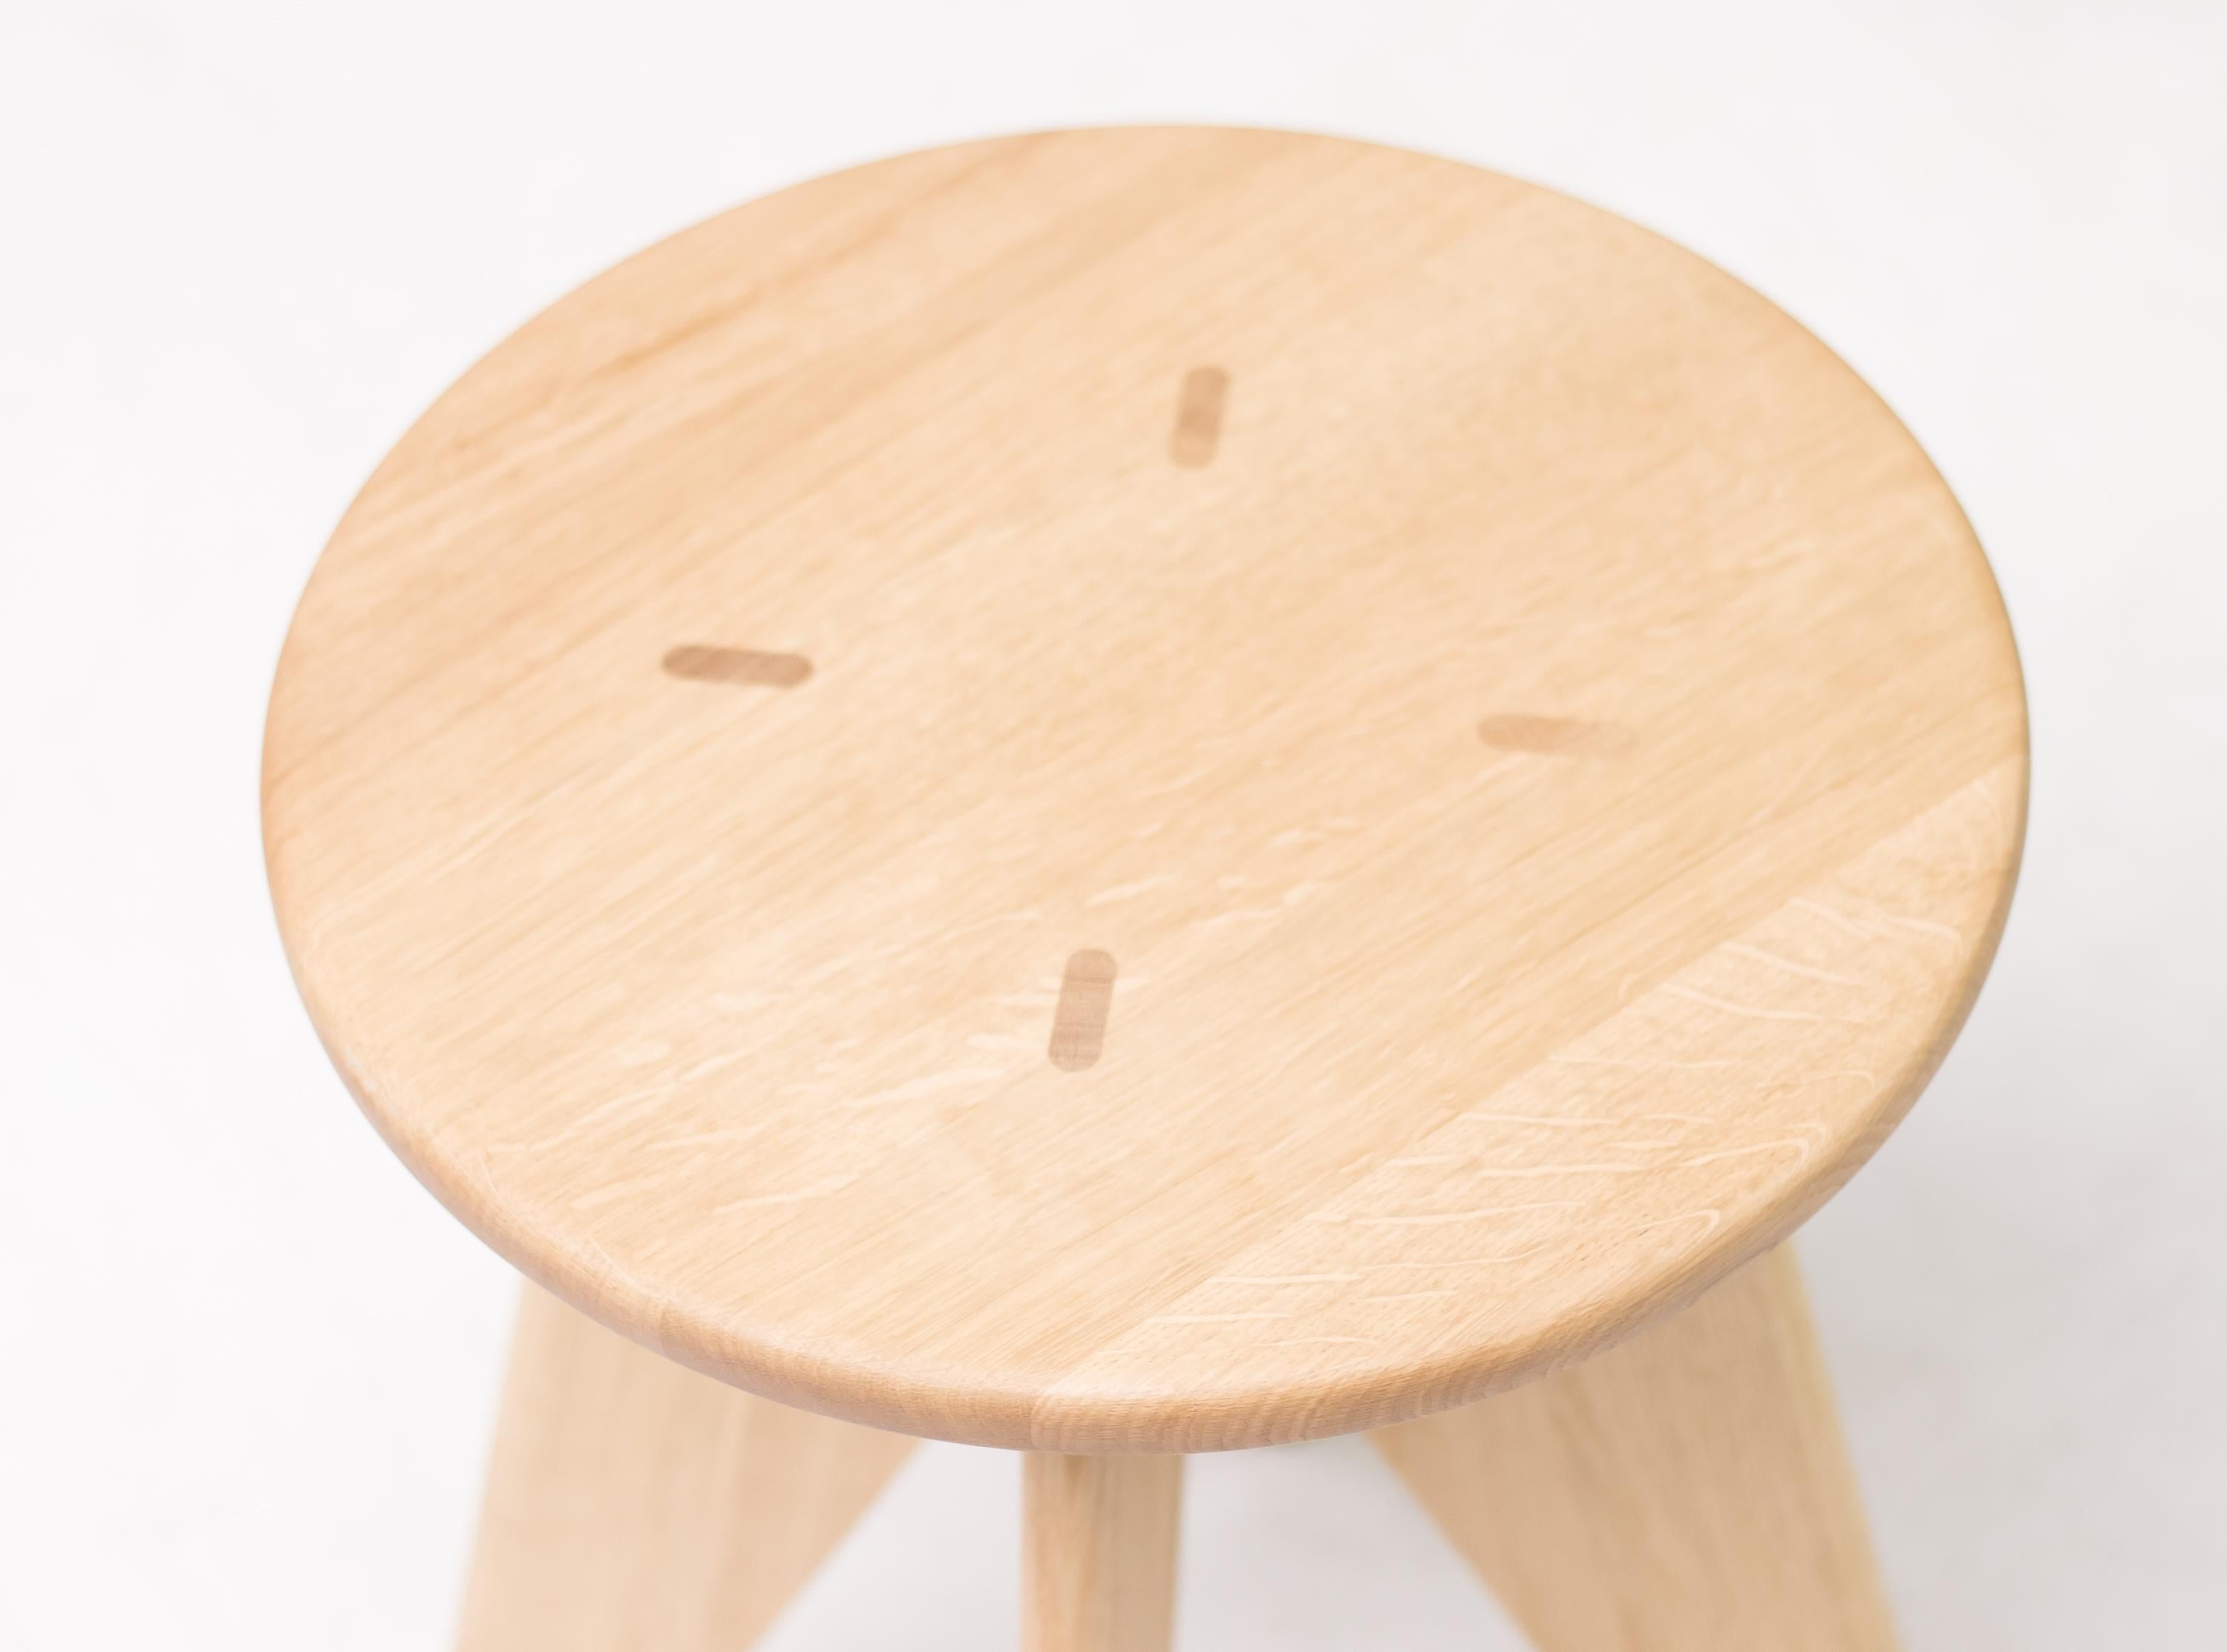 Tabouret Solvay is a simple, robust stool made of solid wood that reveals the designer’s signature at first glance, its clear structural principles can be found throughout the work of Jean Prouvé.
Thanks to the flat, even surface of the seat,